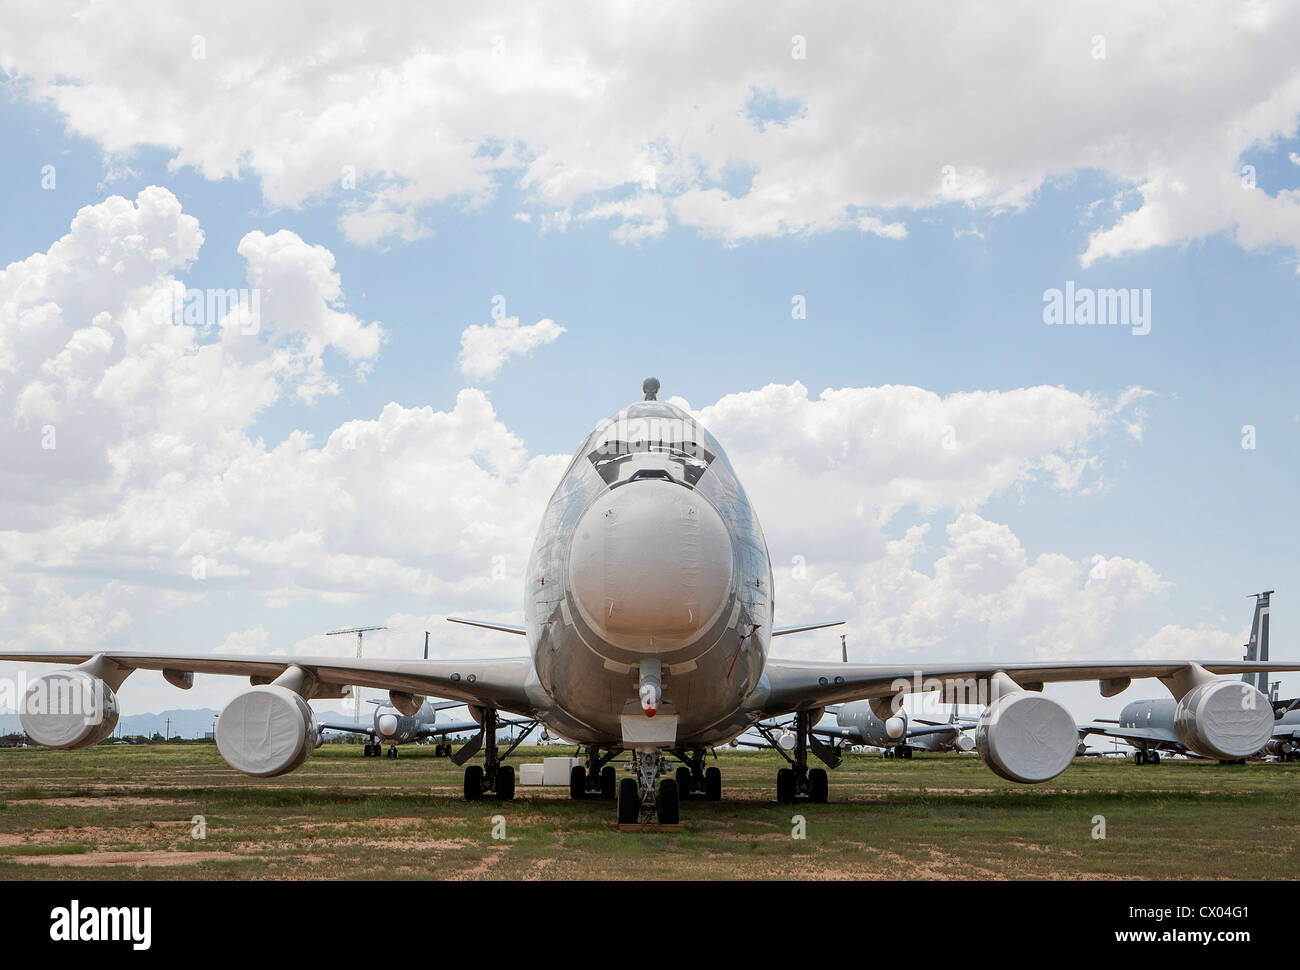 The Boeing YAL-1 Airborne Laser aircraft in storage at the 309th Aerospace Maintenance and Regeneration Group at Davis-Monthan. Stock Photo